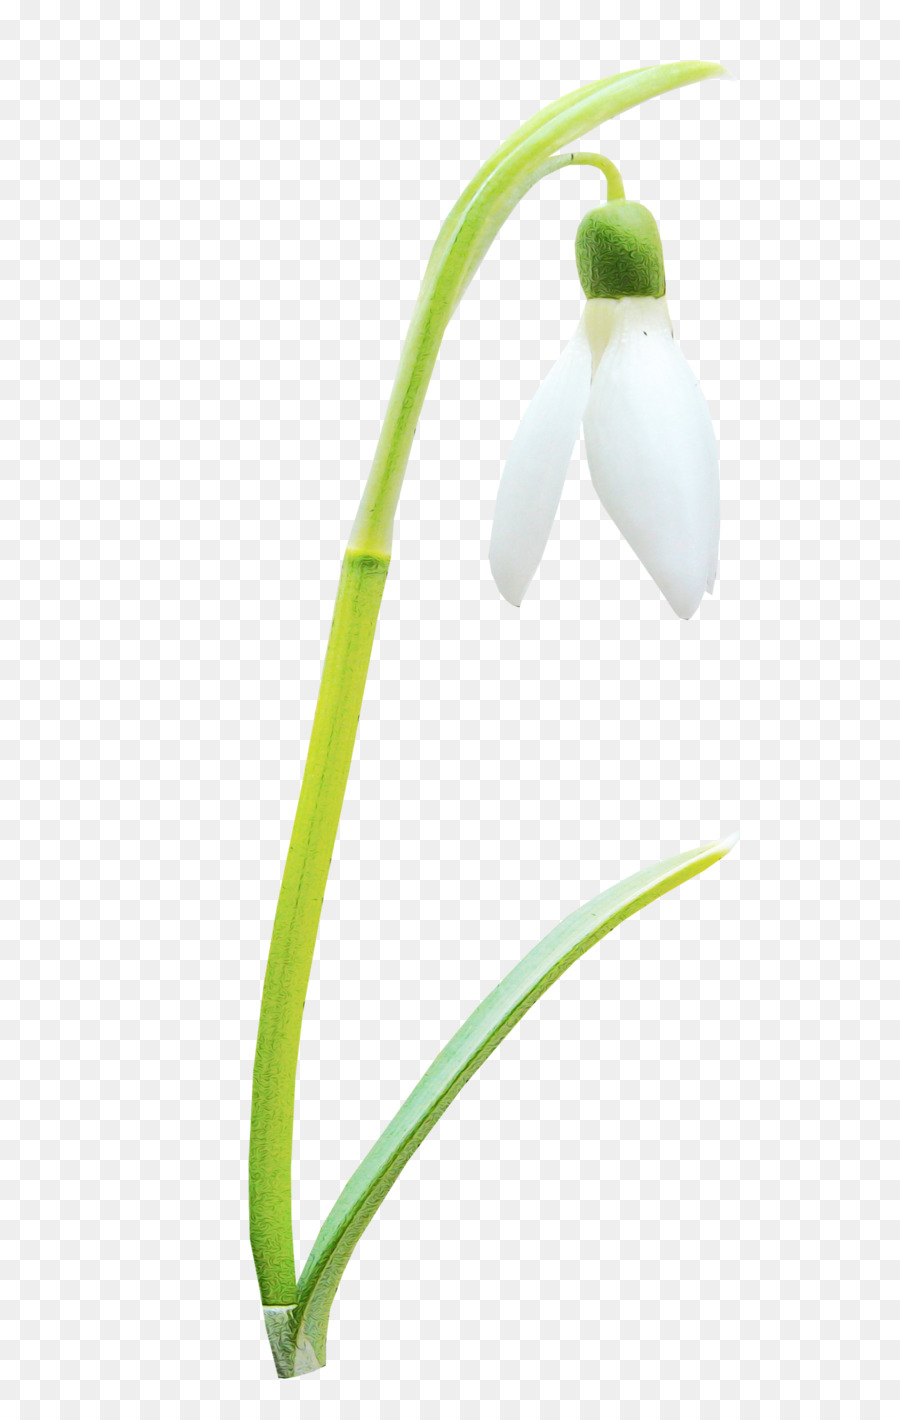 Snowdrop，Galanthus PNG